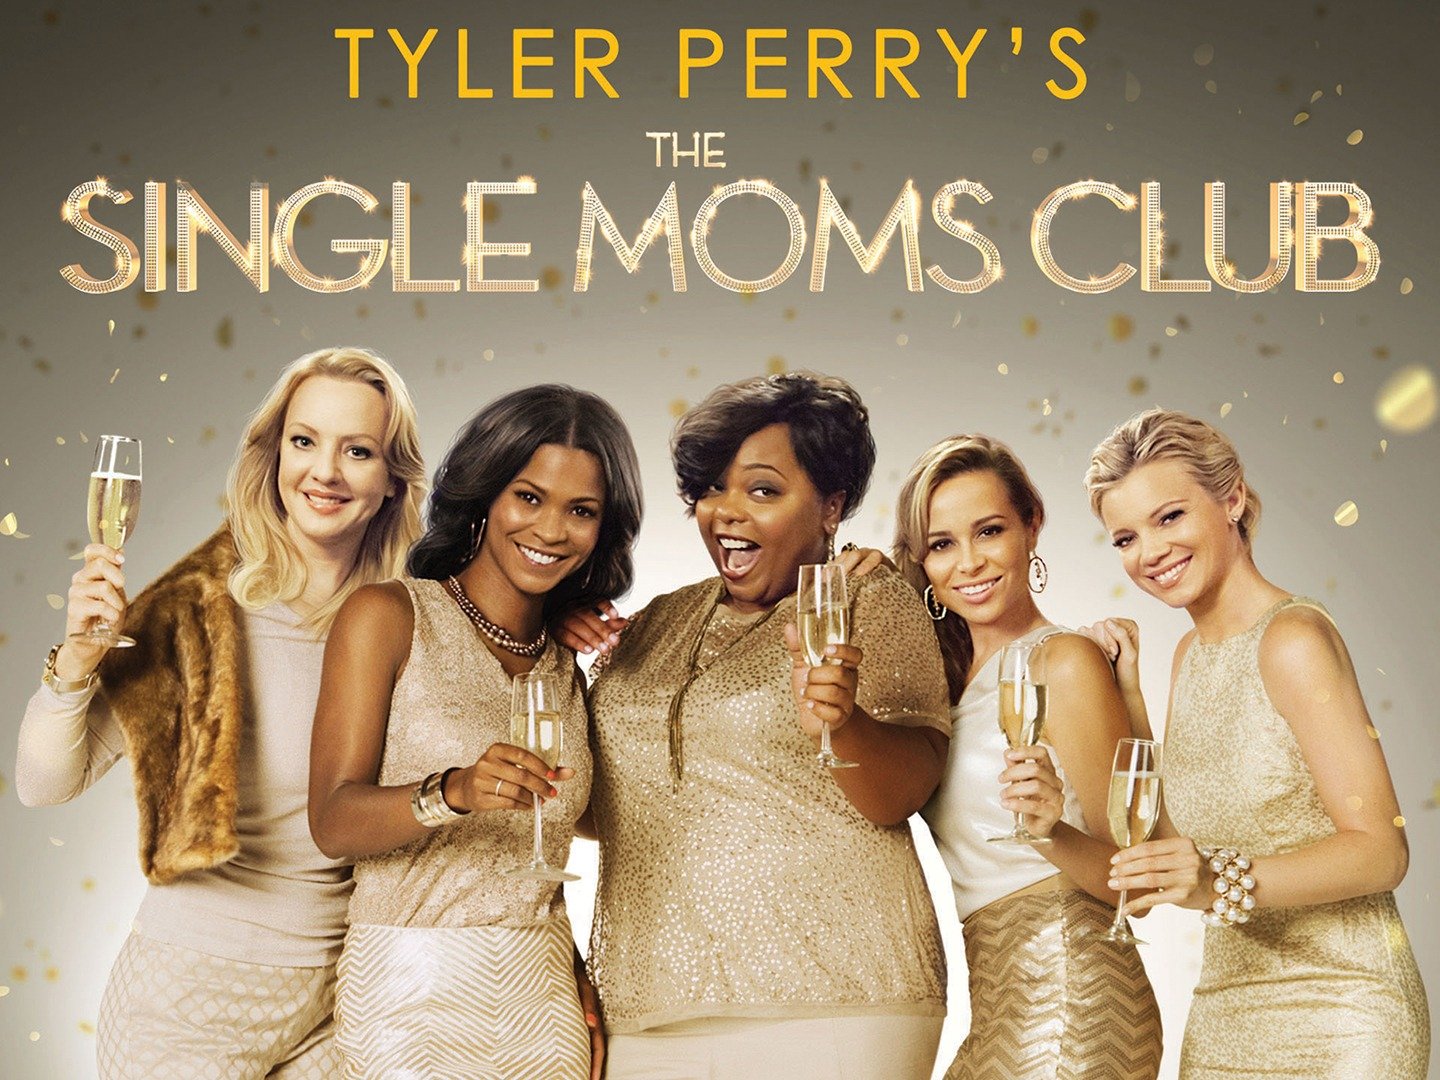 The Single Moms Club Trailer 2 Trailers And Videos Rotten Tomatoes